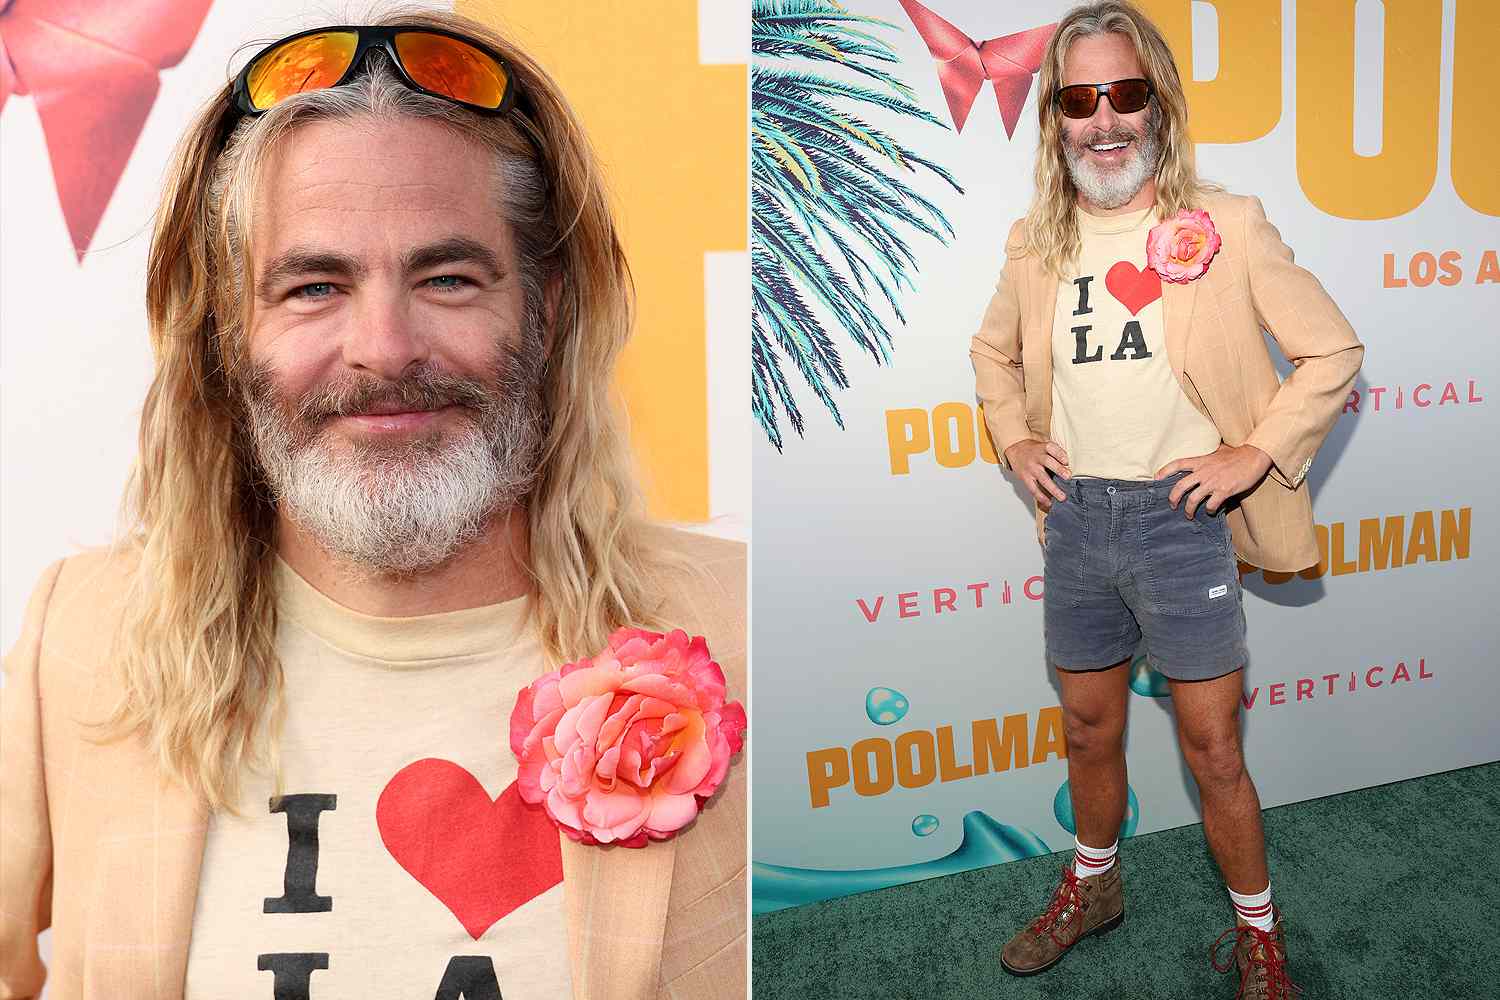 Chris Pine's Latest Red Carpet Look Includes Jorts and Tube Socks and We Can't Stop Staring